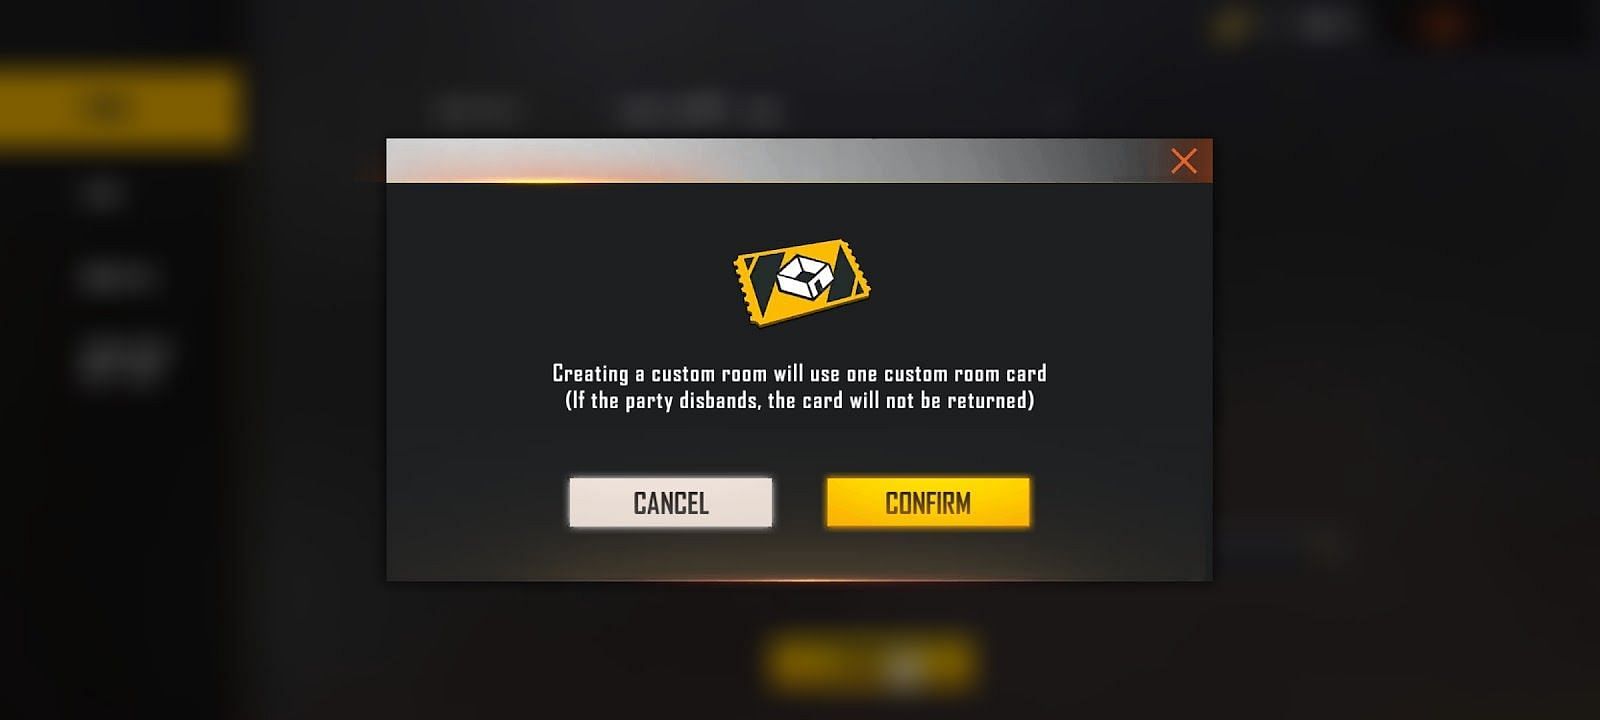 Tap on confirm (Image via Free Fire)